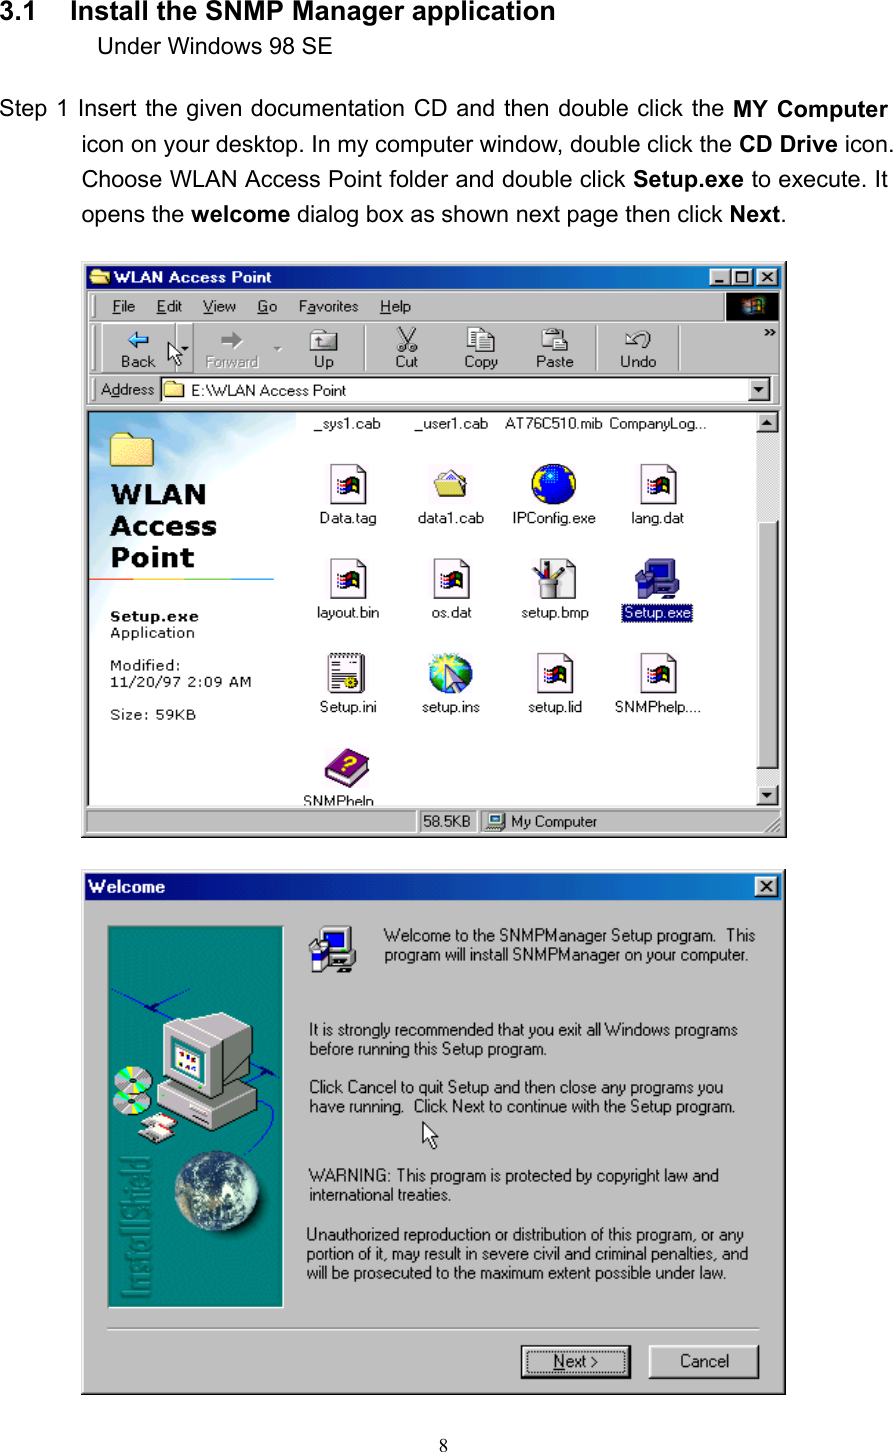   8 3.1    Install the SNMP Manager application        Under Windows 98 SE  Step 1 Insert the given documentation CD and then double click the MY Computer icon on your desktop. In my computer window, double click the CD Drive icon. Choose WLAN Access Point folder and double click Setup.exe to execute. It opens the welcome dialog box as shown next page then click Next.  